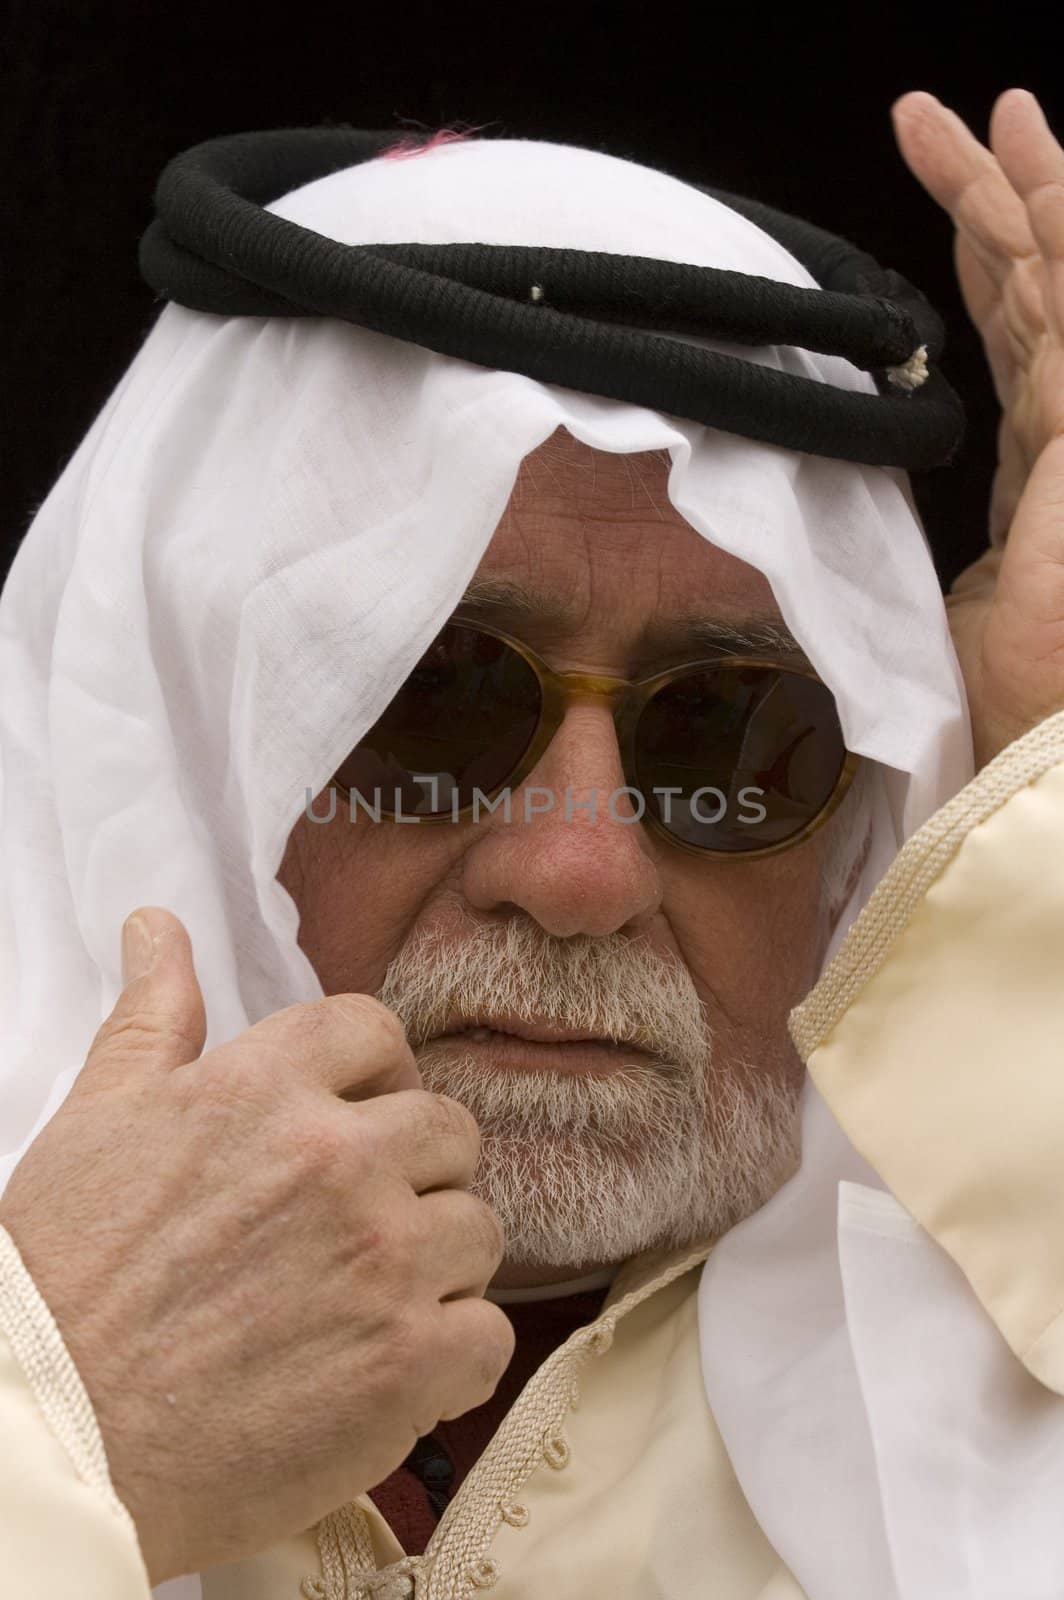 Arabic looking gentleman in a dishdash, traditional headress and wearing sunglasses, making getures during conversation